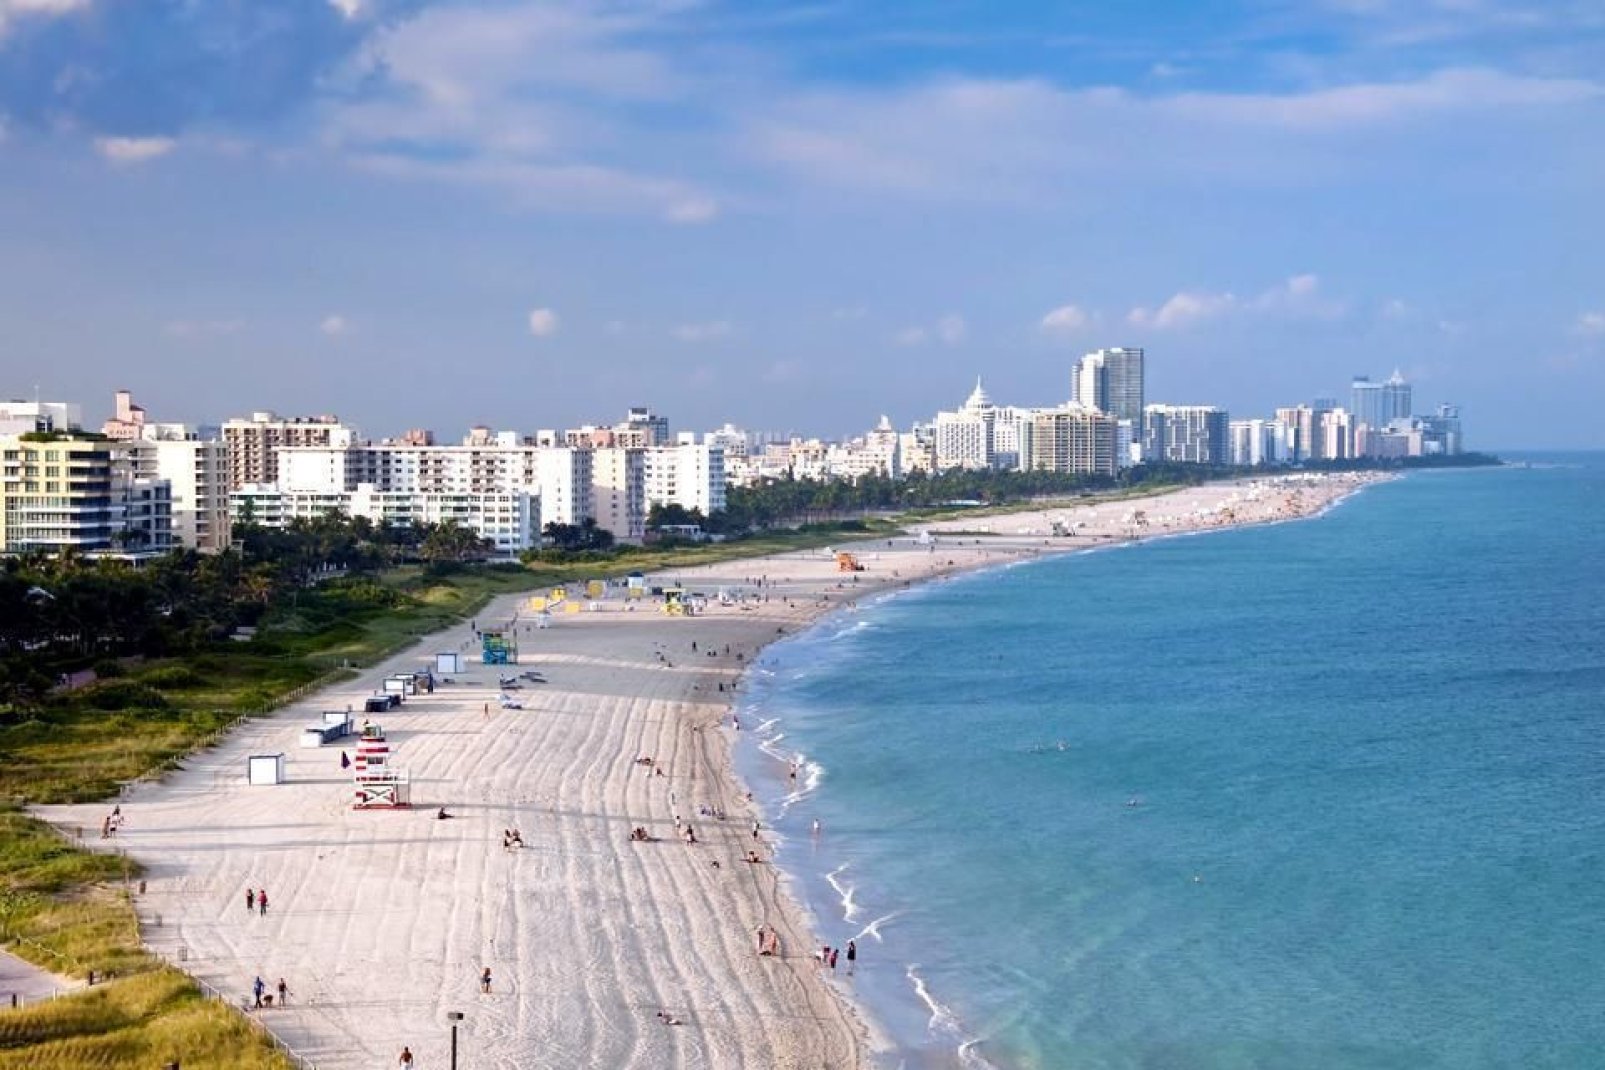 Miami Beach, a city neighbouring Miami, is known for its fine sand, its palm trees and its numerous private beaches.